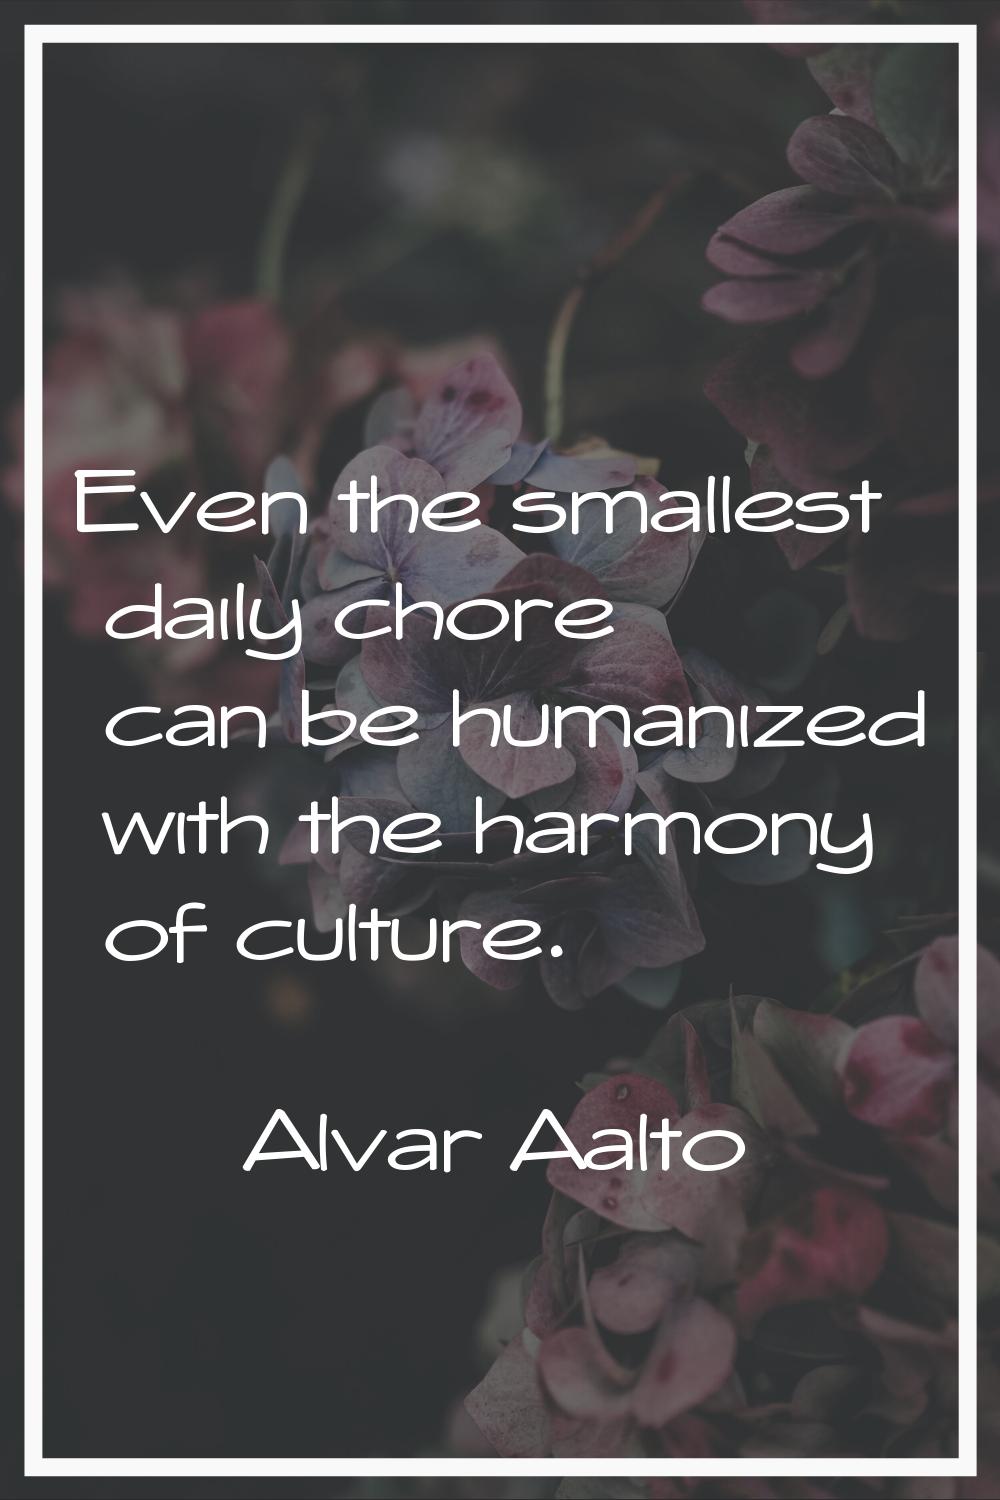 Even the smallest daily chore can be humanized with the harmony of culture.